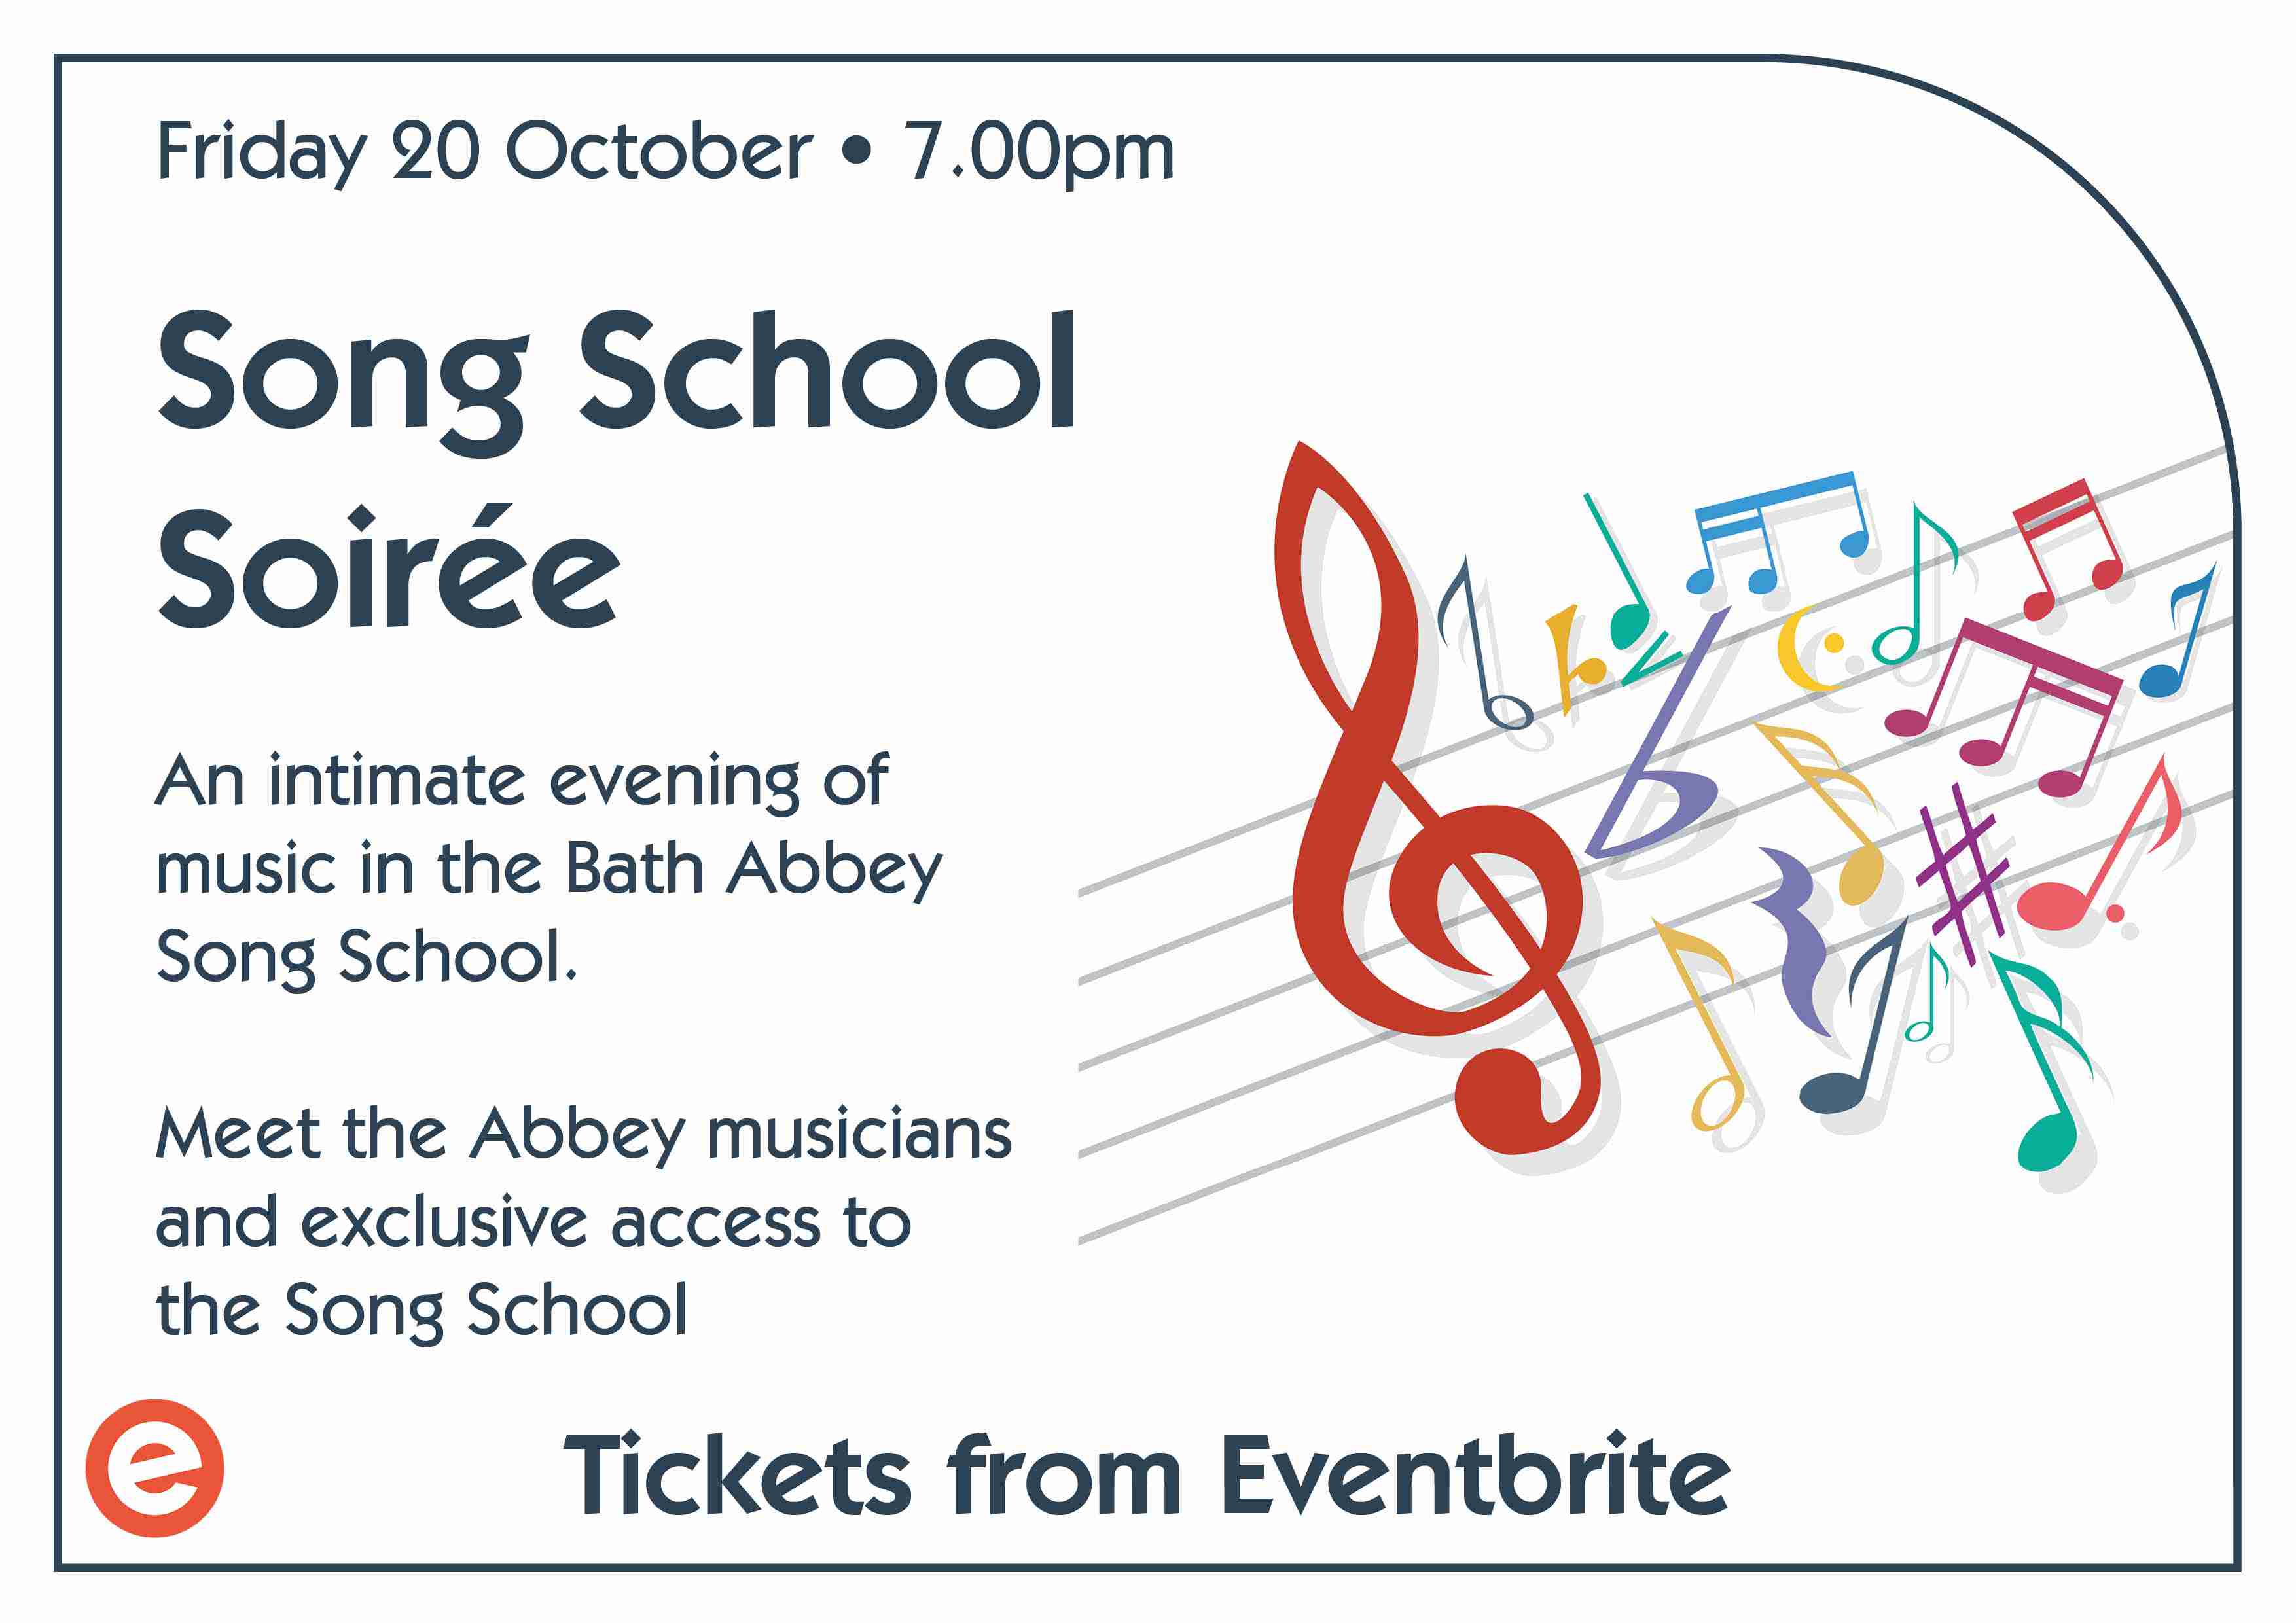 Song School Soirée Poster - 20th October from Eventbrite